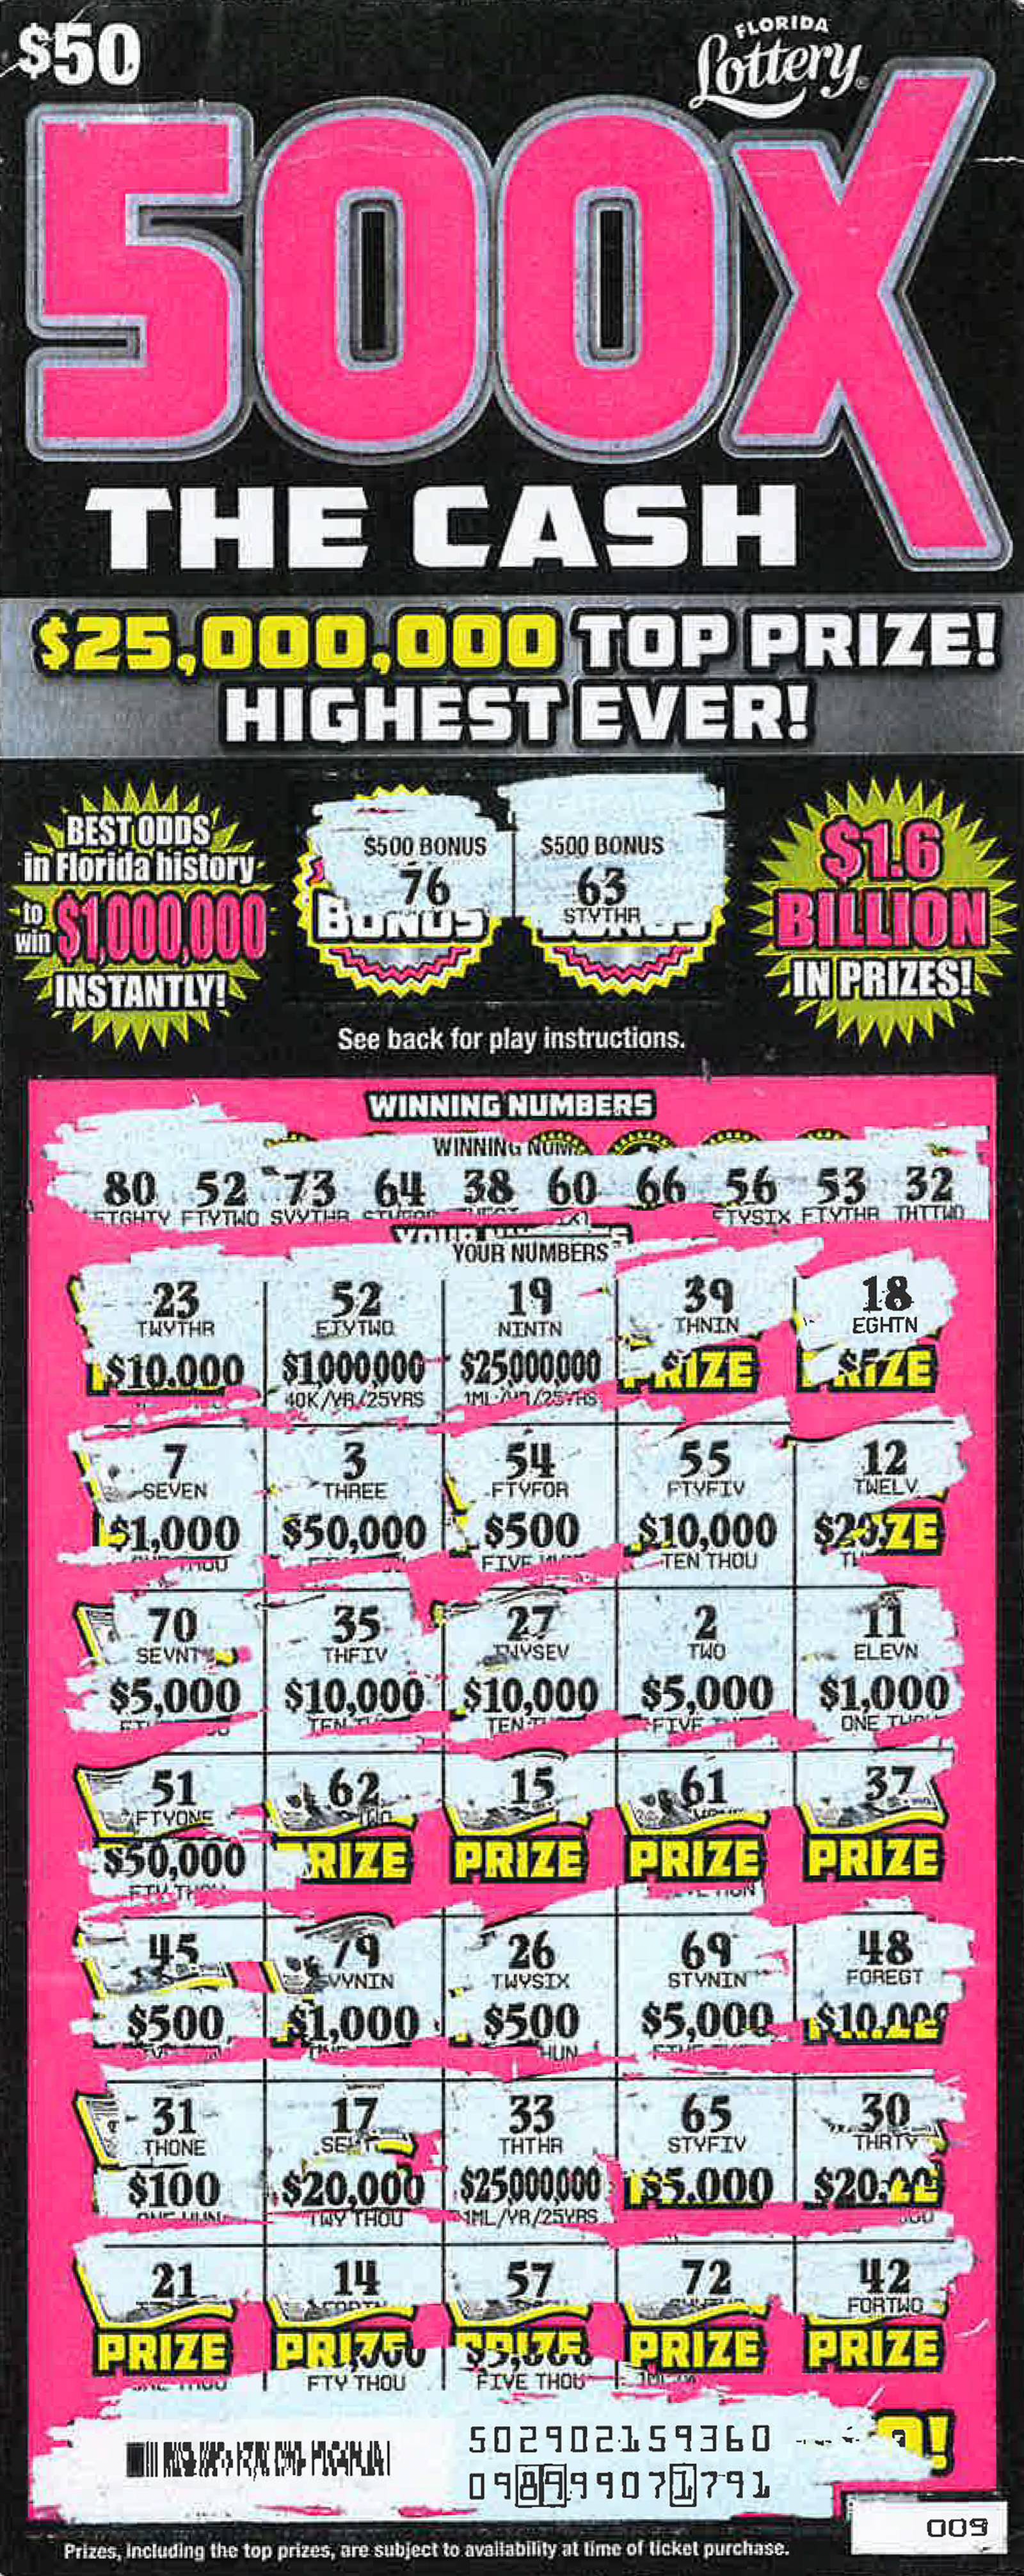 Winter Haven woman wins 1 million in Florida Lottery scratchoff game